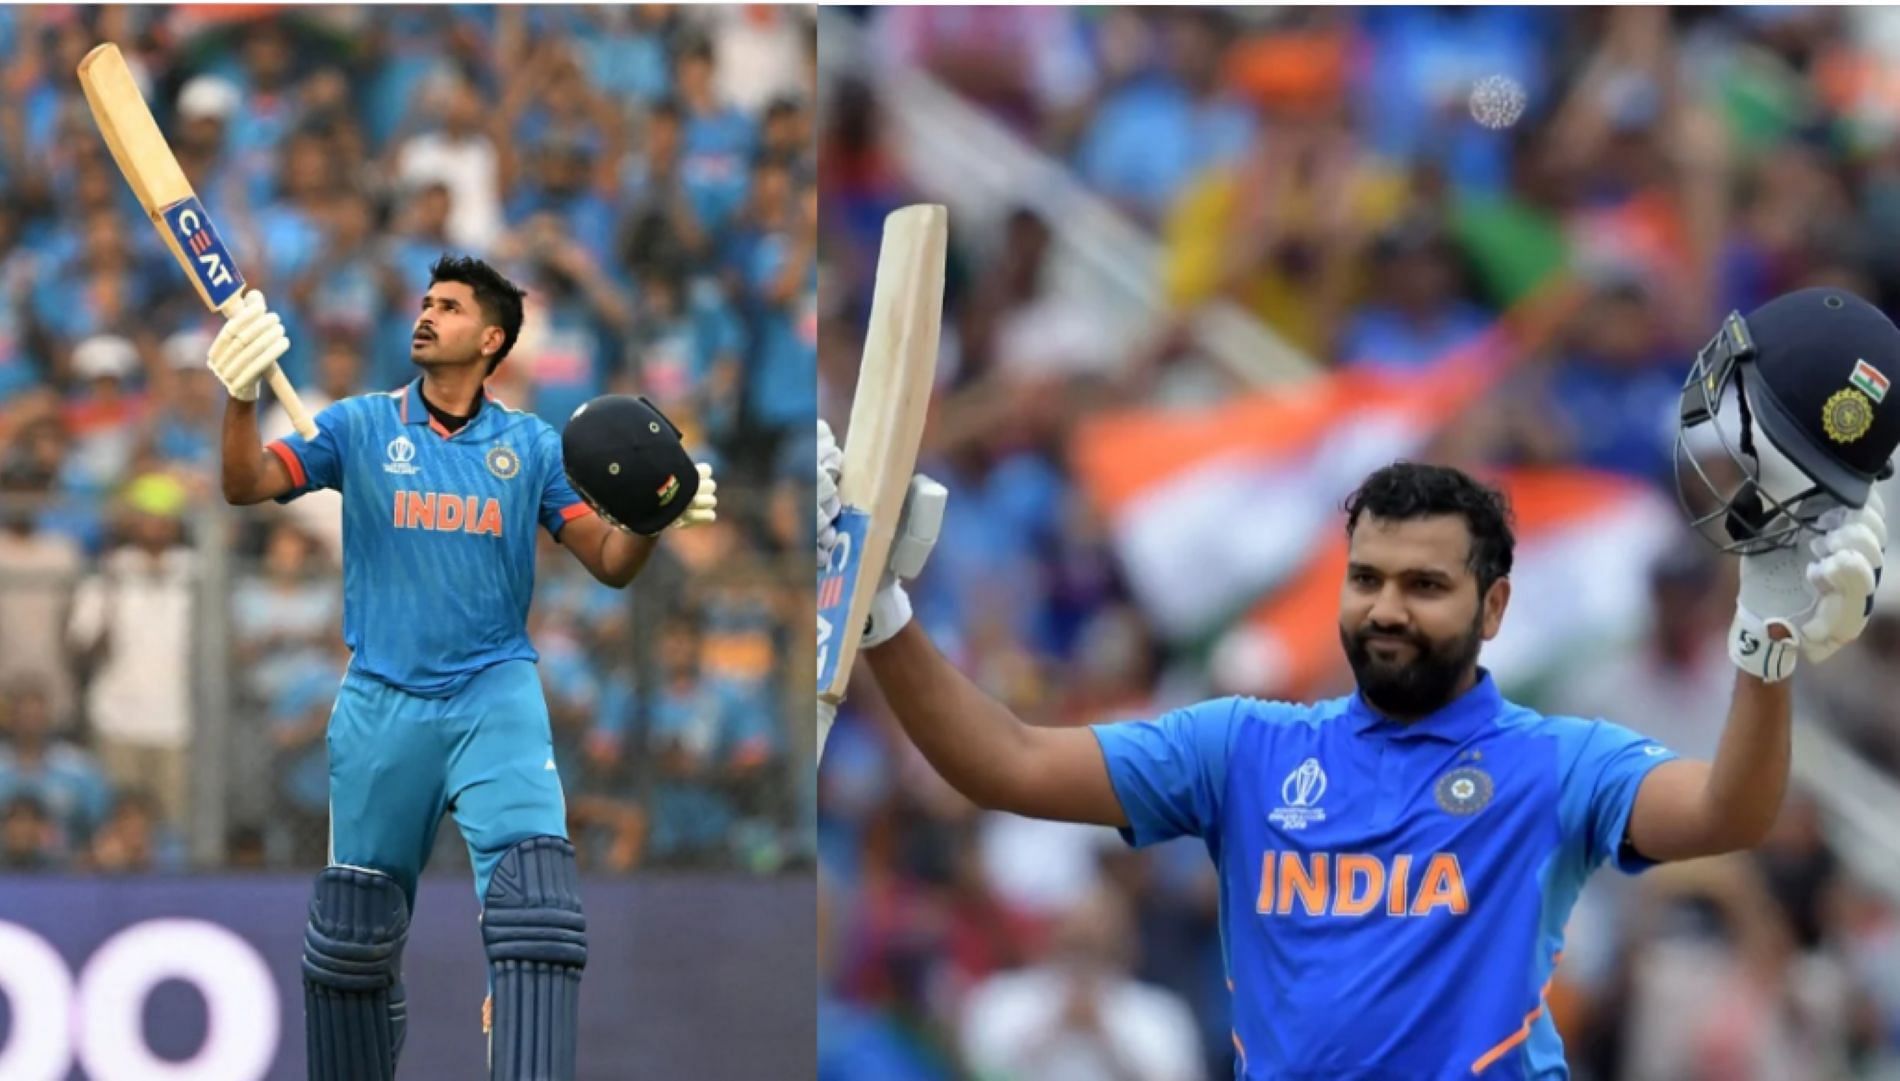 Several Indian batters have smashed centuries for fun in World Cups